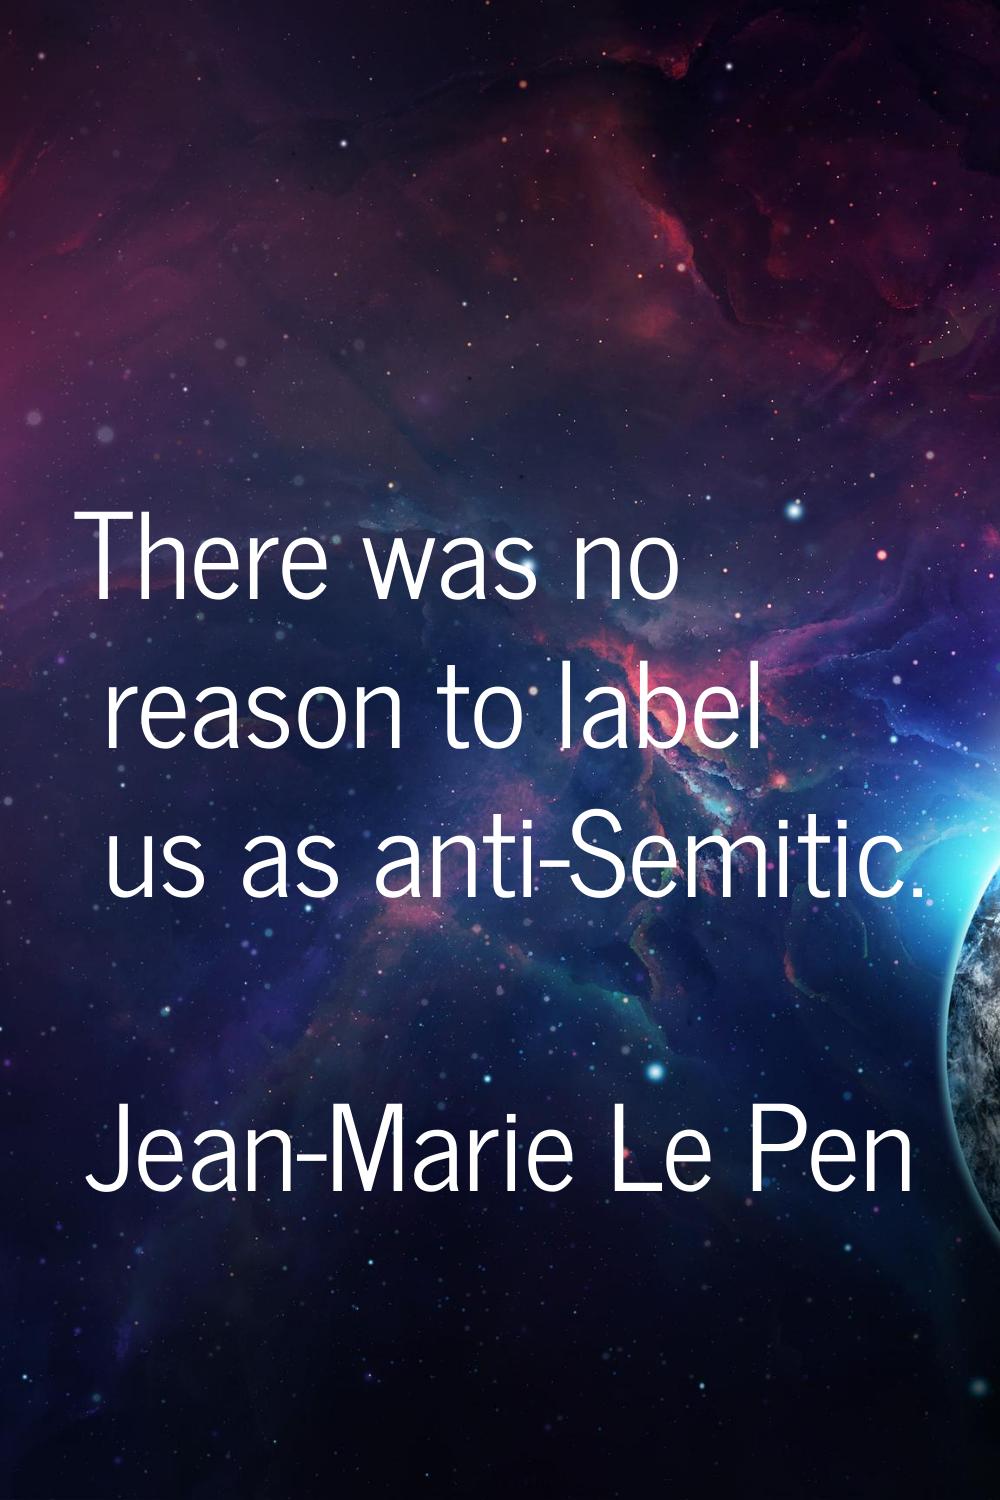 There was no reason to label us as anti-Semitic.